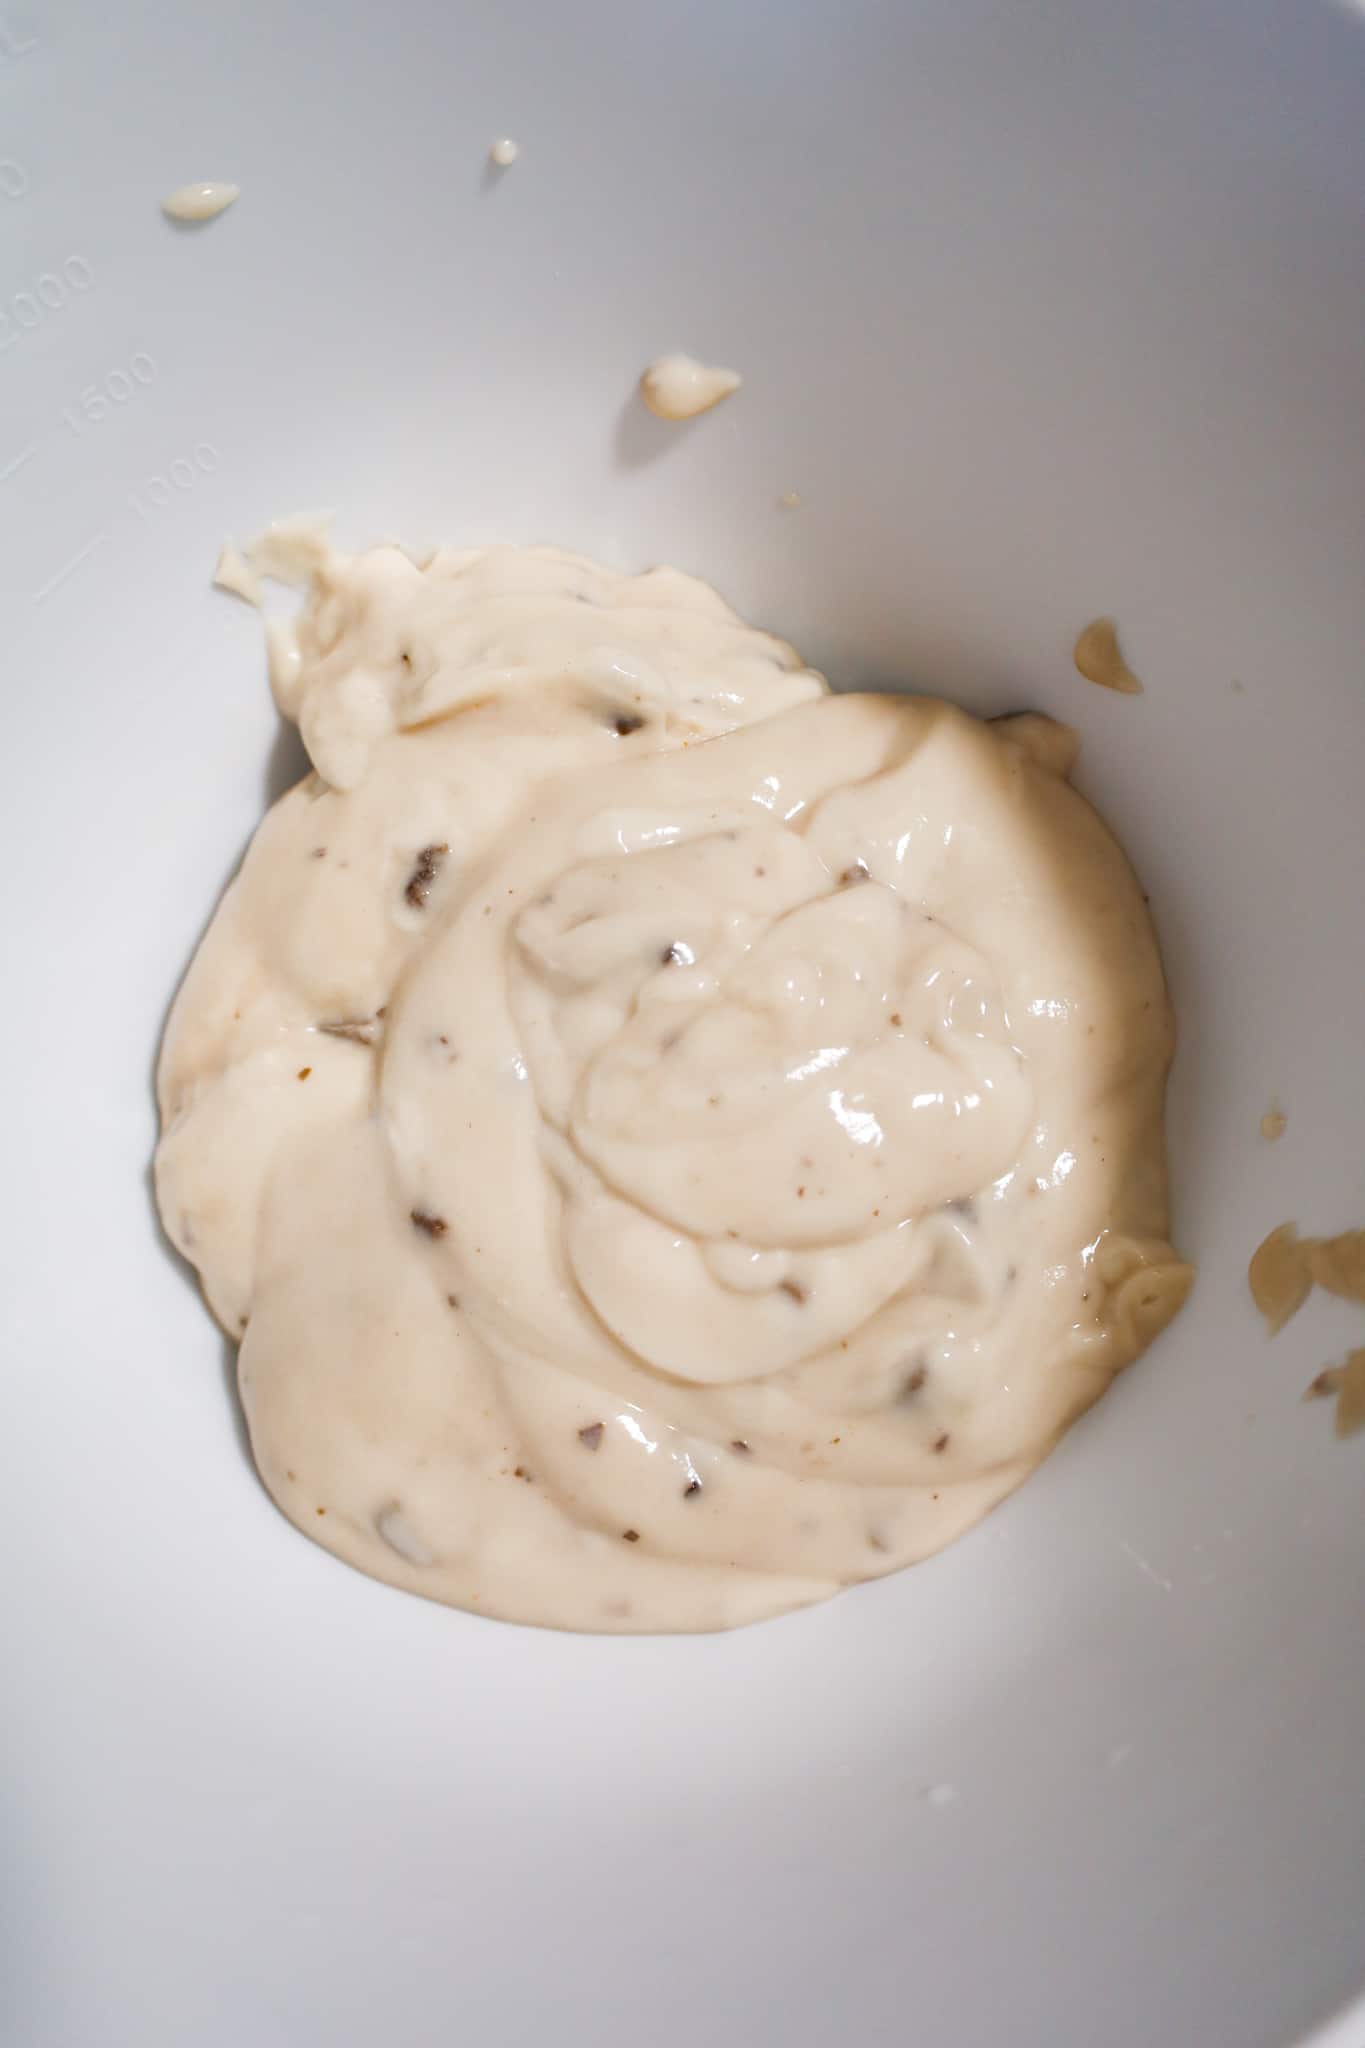 condensed cream of mushroom soup in a mixing bowl